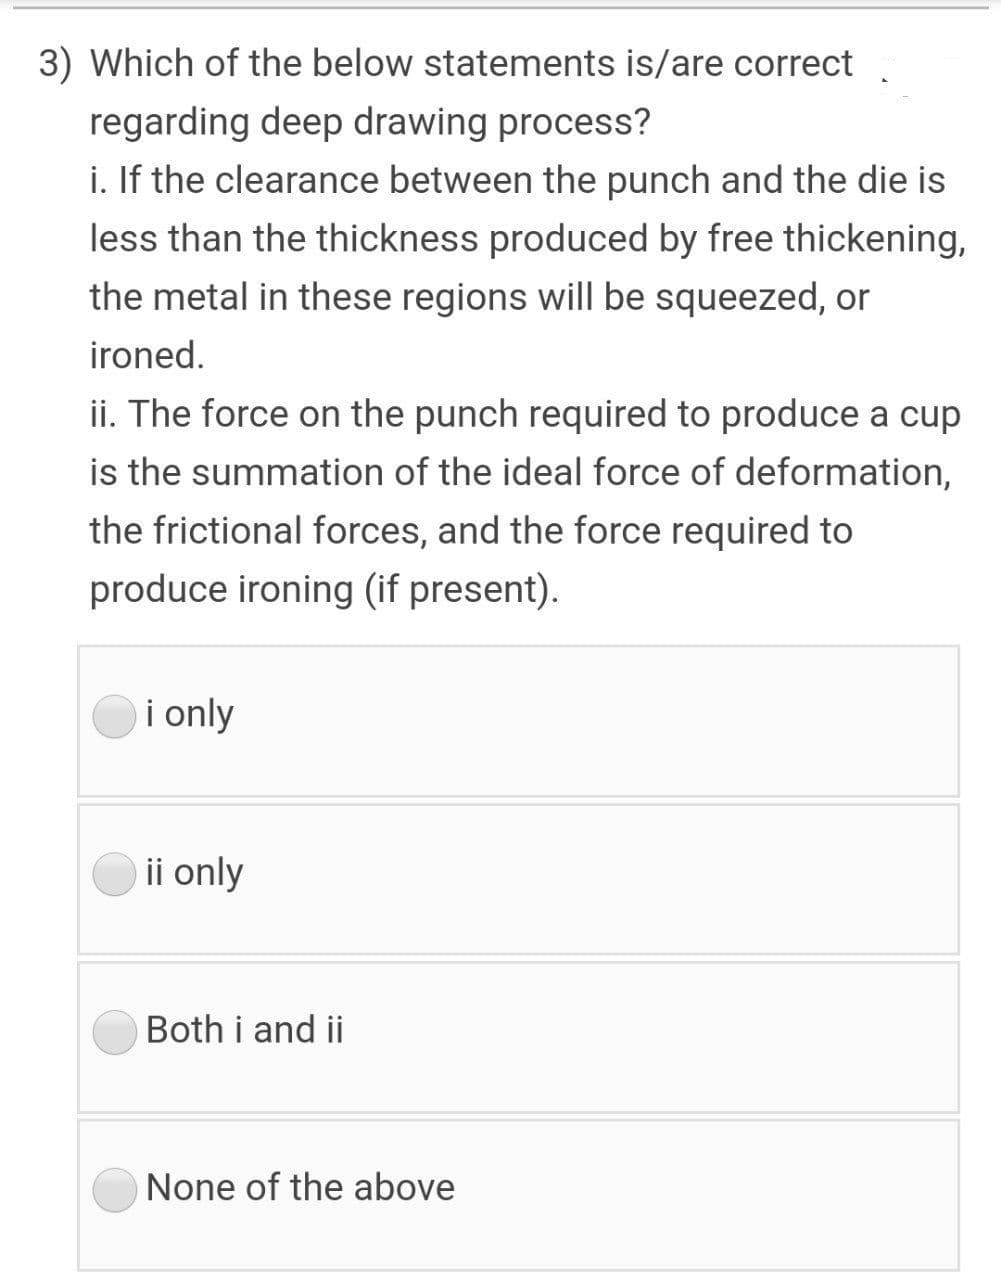 3) Which of the below statements is/are correct
regarding deep drawing process?
i. If the clearance between the punch and the die is
less than the thickness produced by free thickening,
the metal in these regions will be squeezed, or
ironed.
ii. The force on the punch required to produce a cup
is the summation of the ideal force of deformation,
the frictional forces, and the force required to
produce ironing (if present).
i only
ii only
Both i and ii
None of the above
